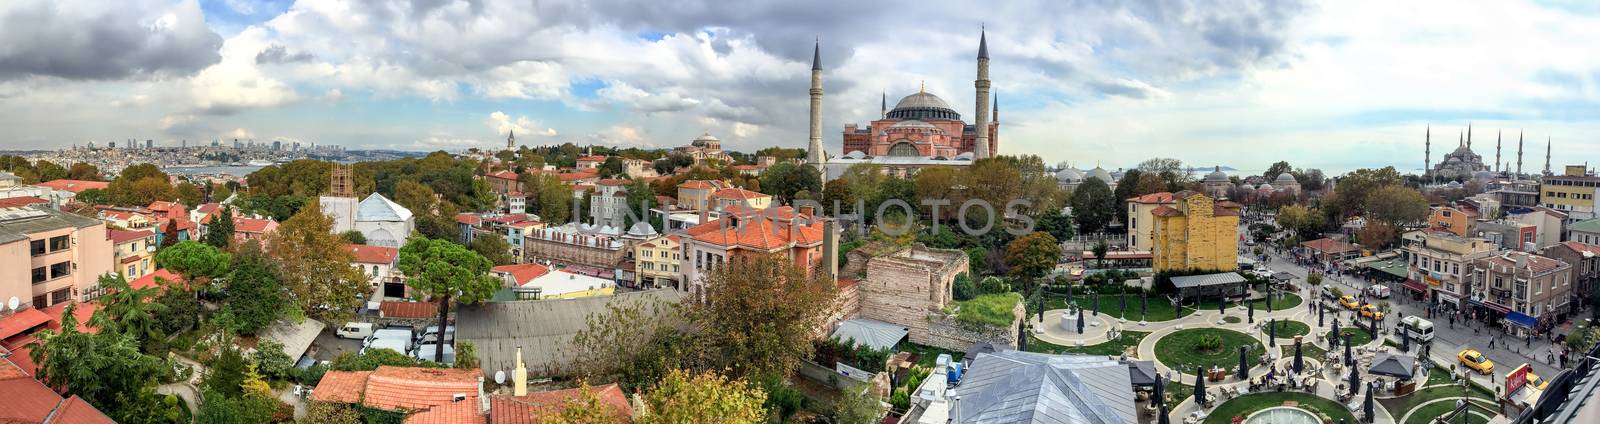 ISTANBUL - SEPTEMBER 21, 2014: Tourists enjoy city life in Sultanahmet Park. Istanbul attracts more than 10 million every year.